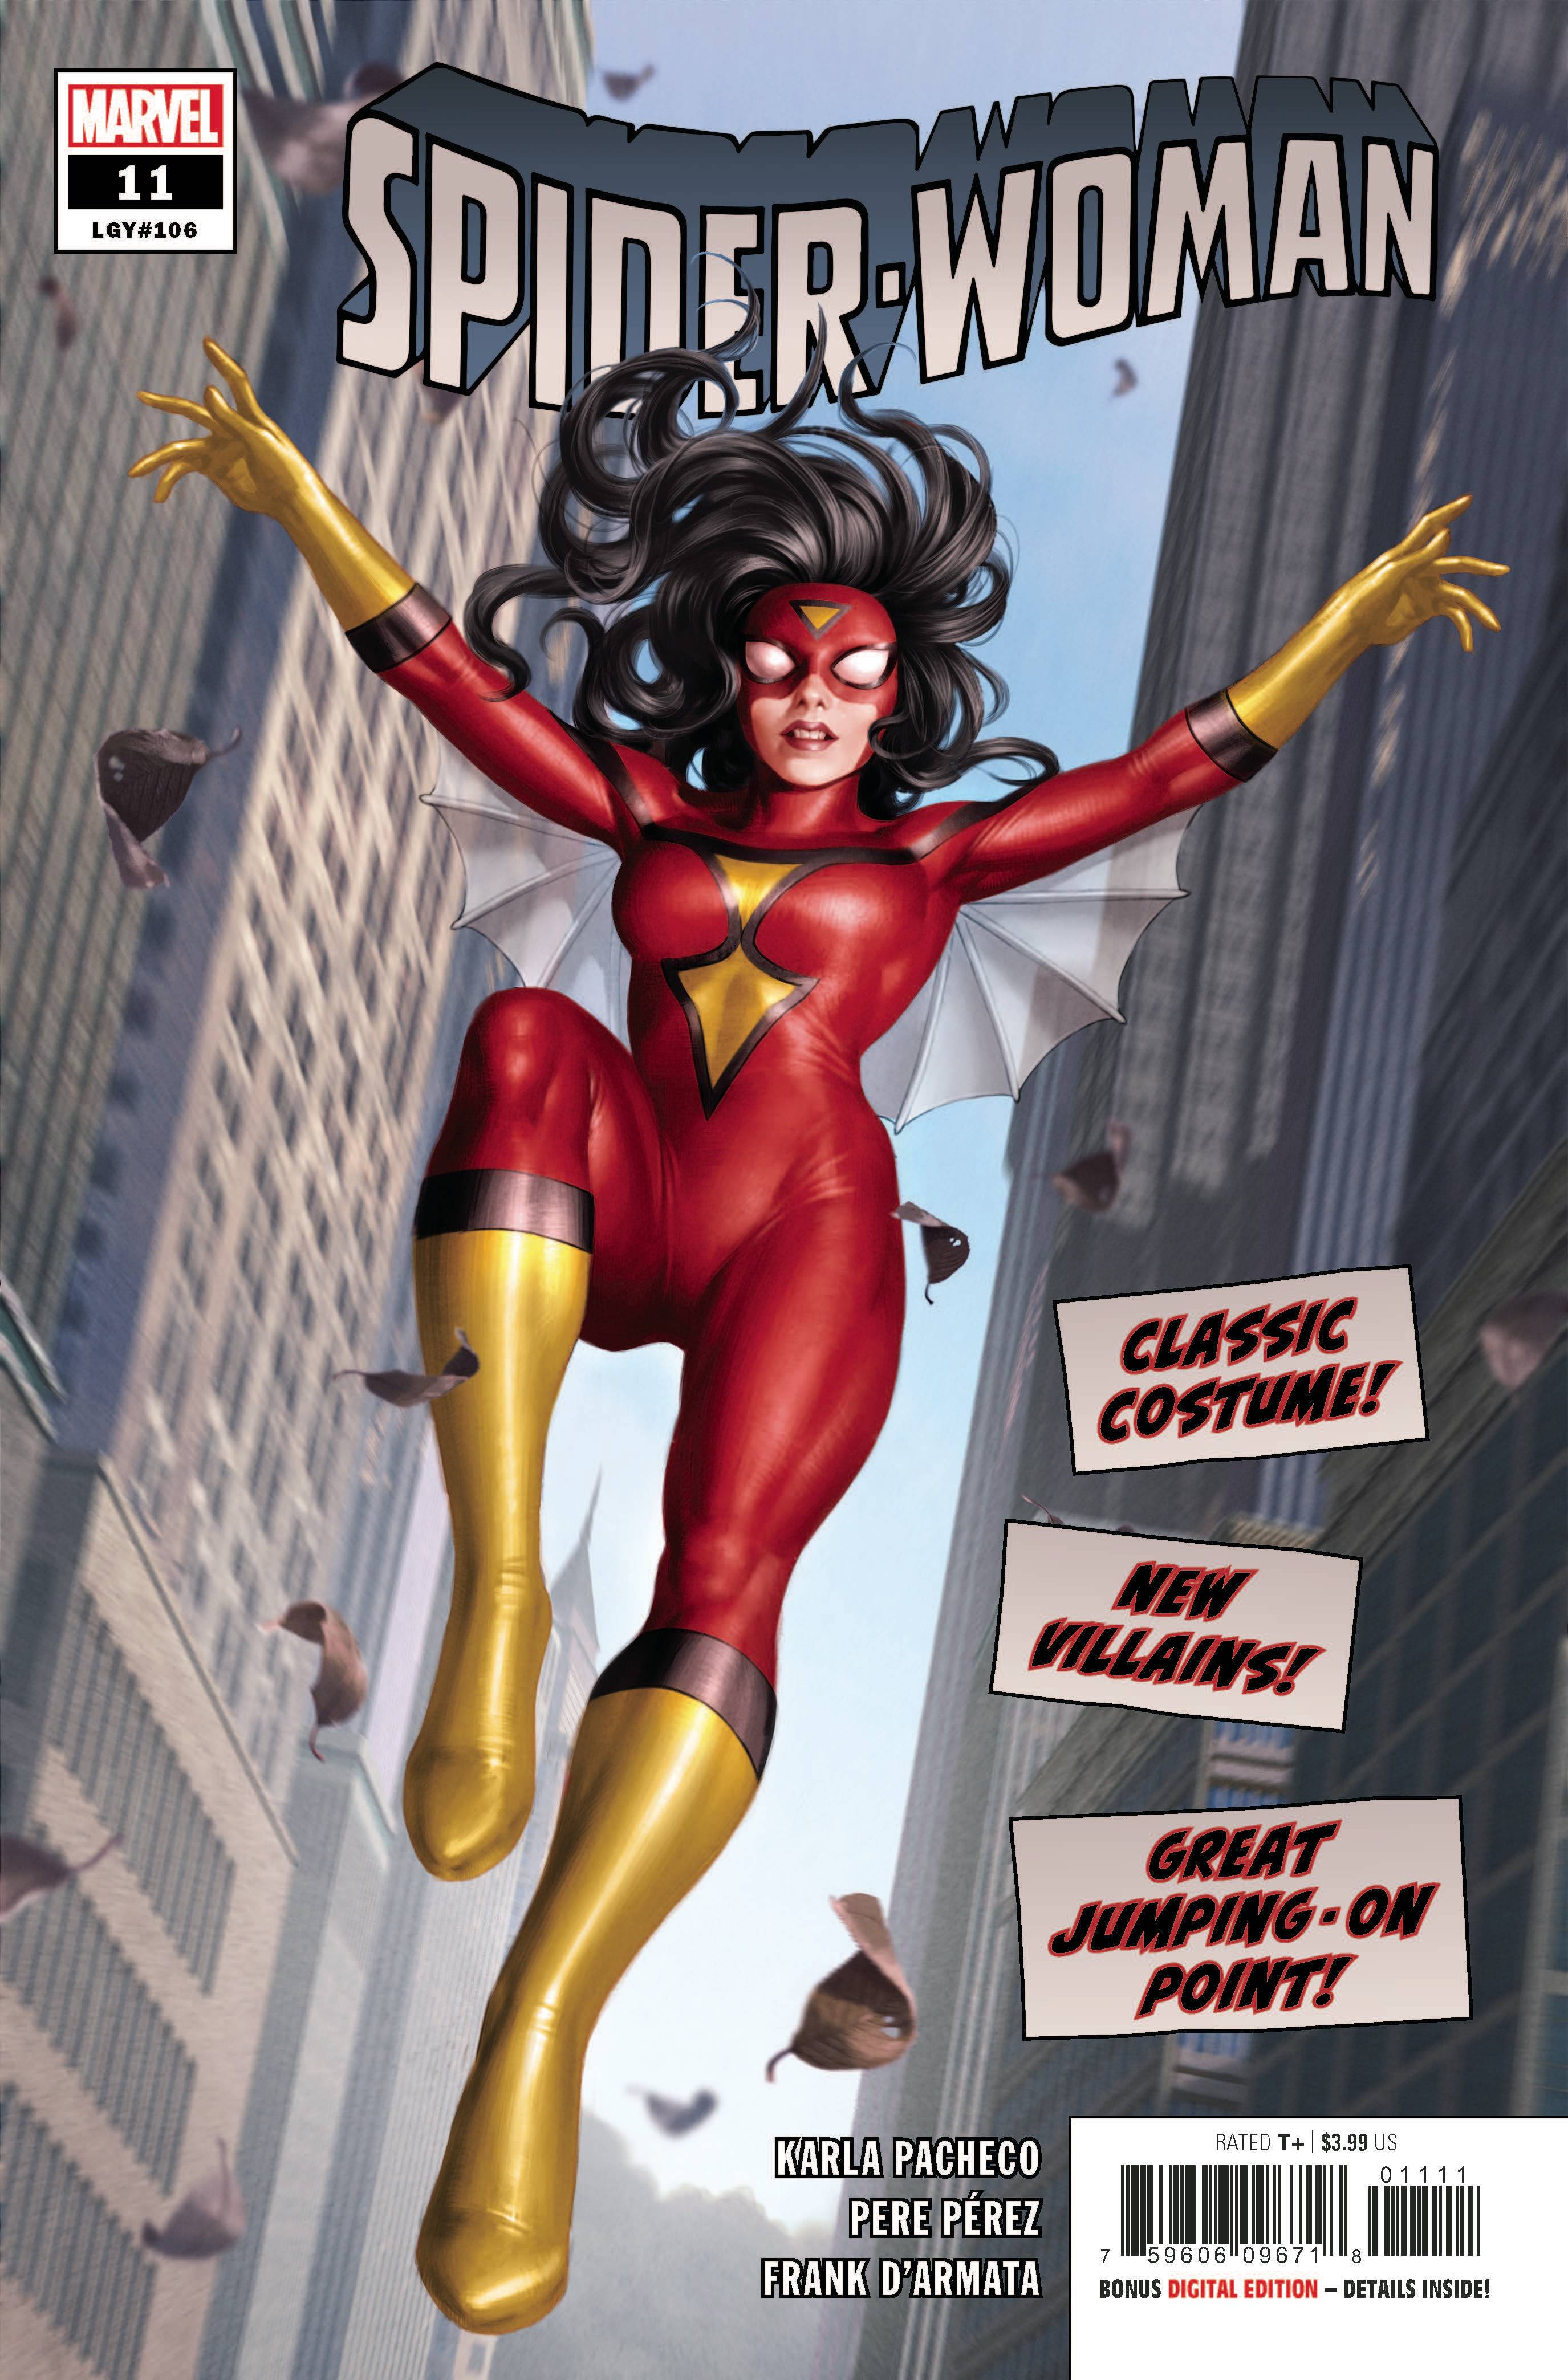 SPIDER-WOMAN #11 | Game Master's Emporium (The New GME)